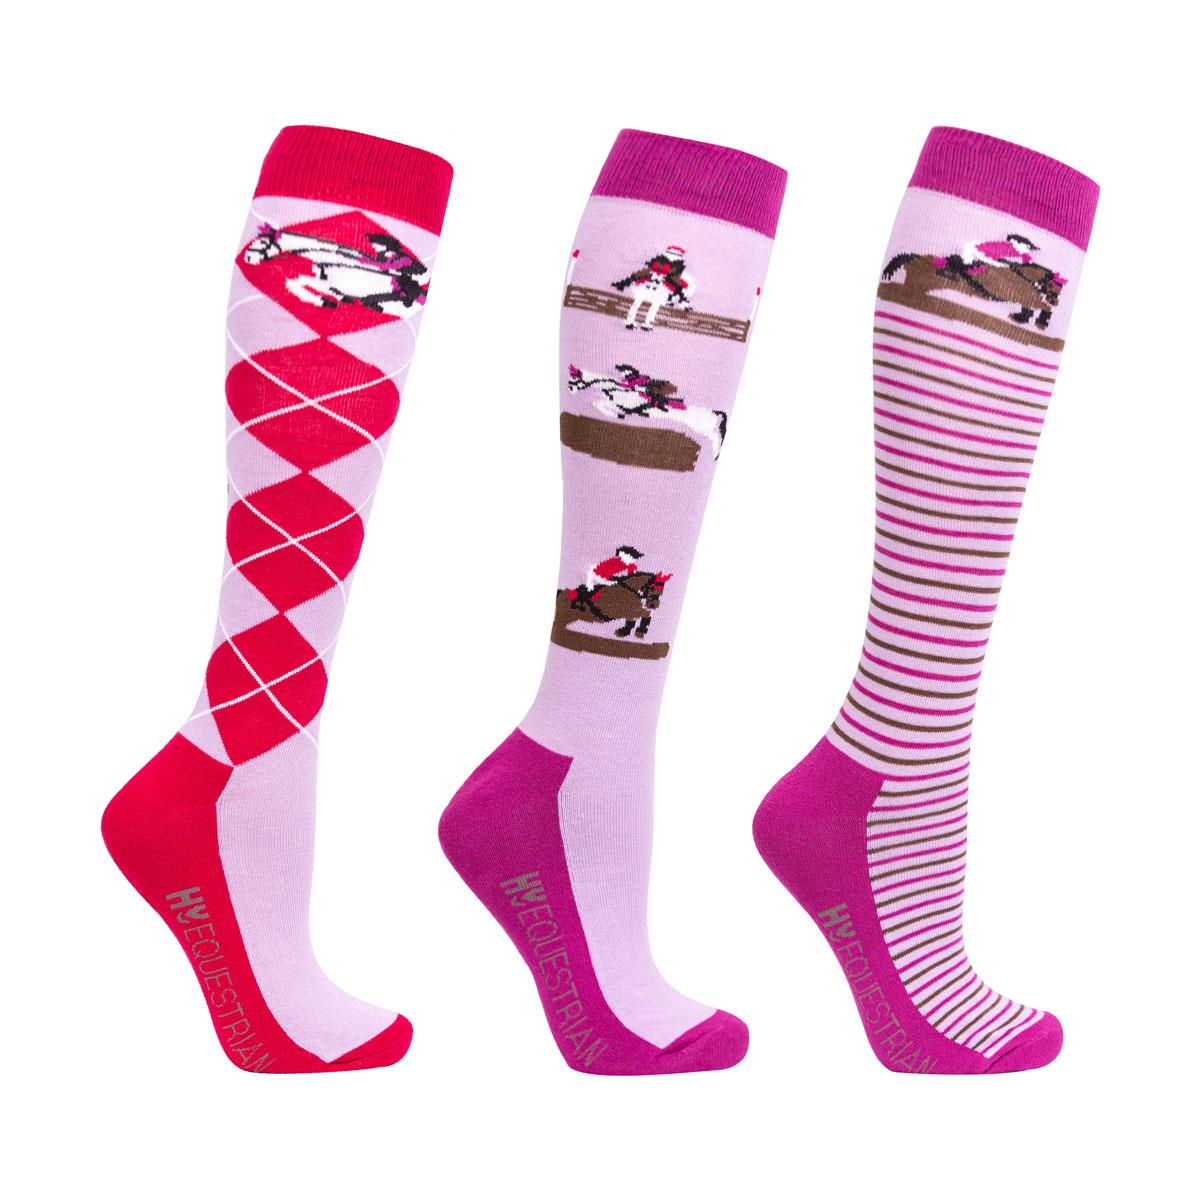 Hy Equestrian Cross Country Horse Riding Socks (Pack of3) - Just Horse Riders